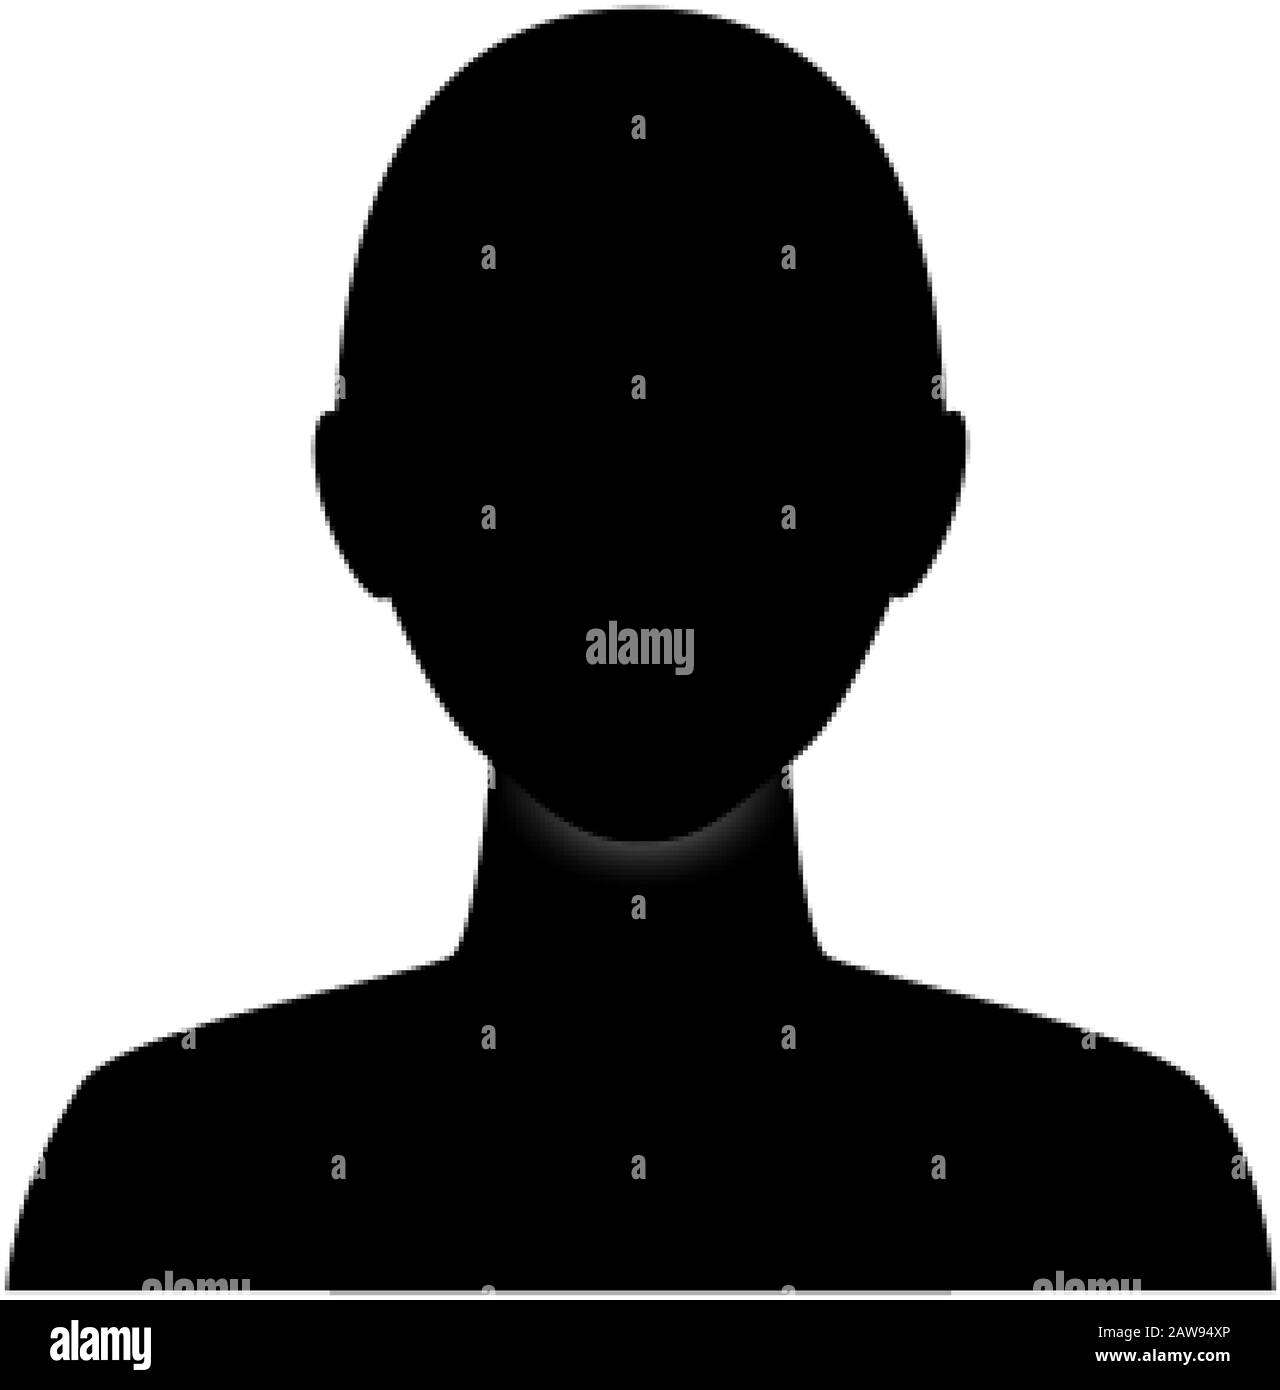 https://c8.alamy.com/comp/2AW94XP/anonymous-gender-neutral-face-avatar-incognito-head-silhouette-2AW94XP.jpg